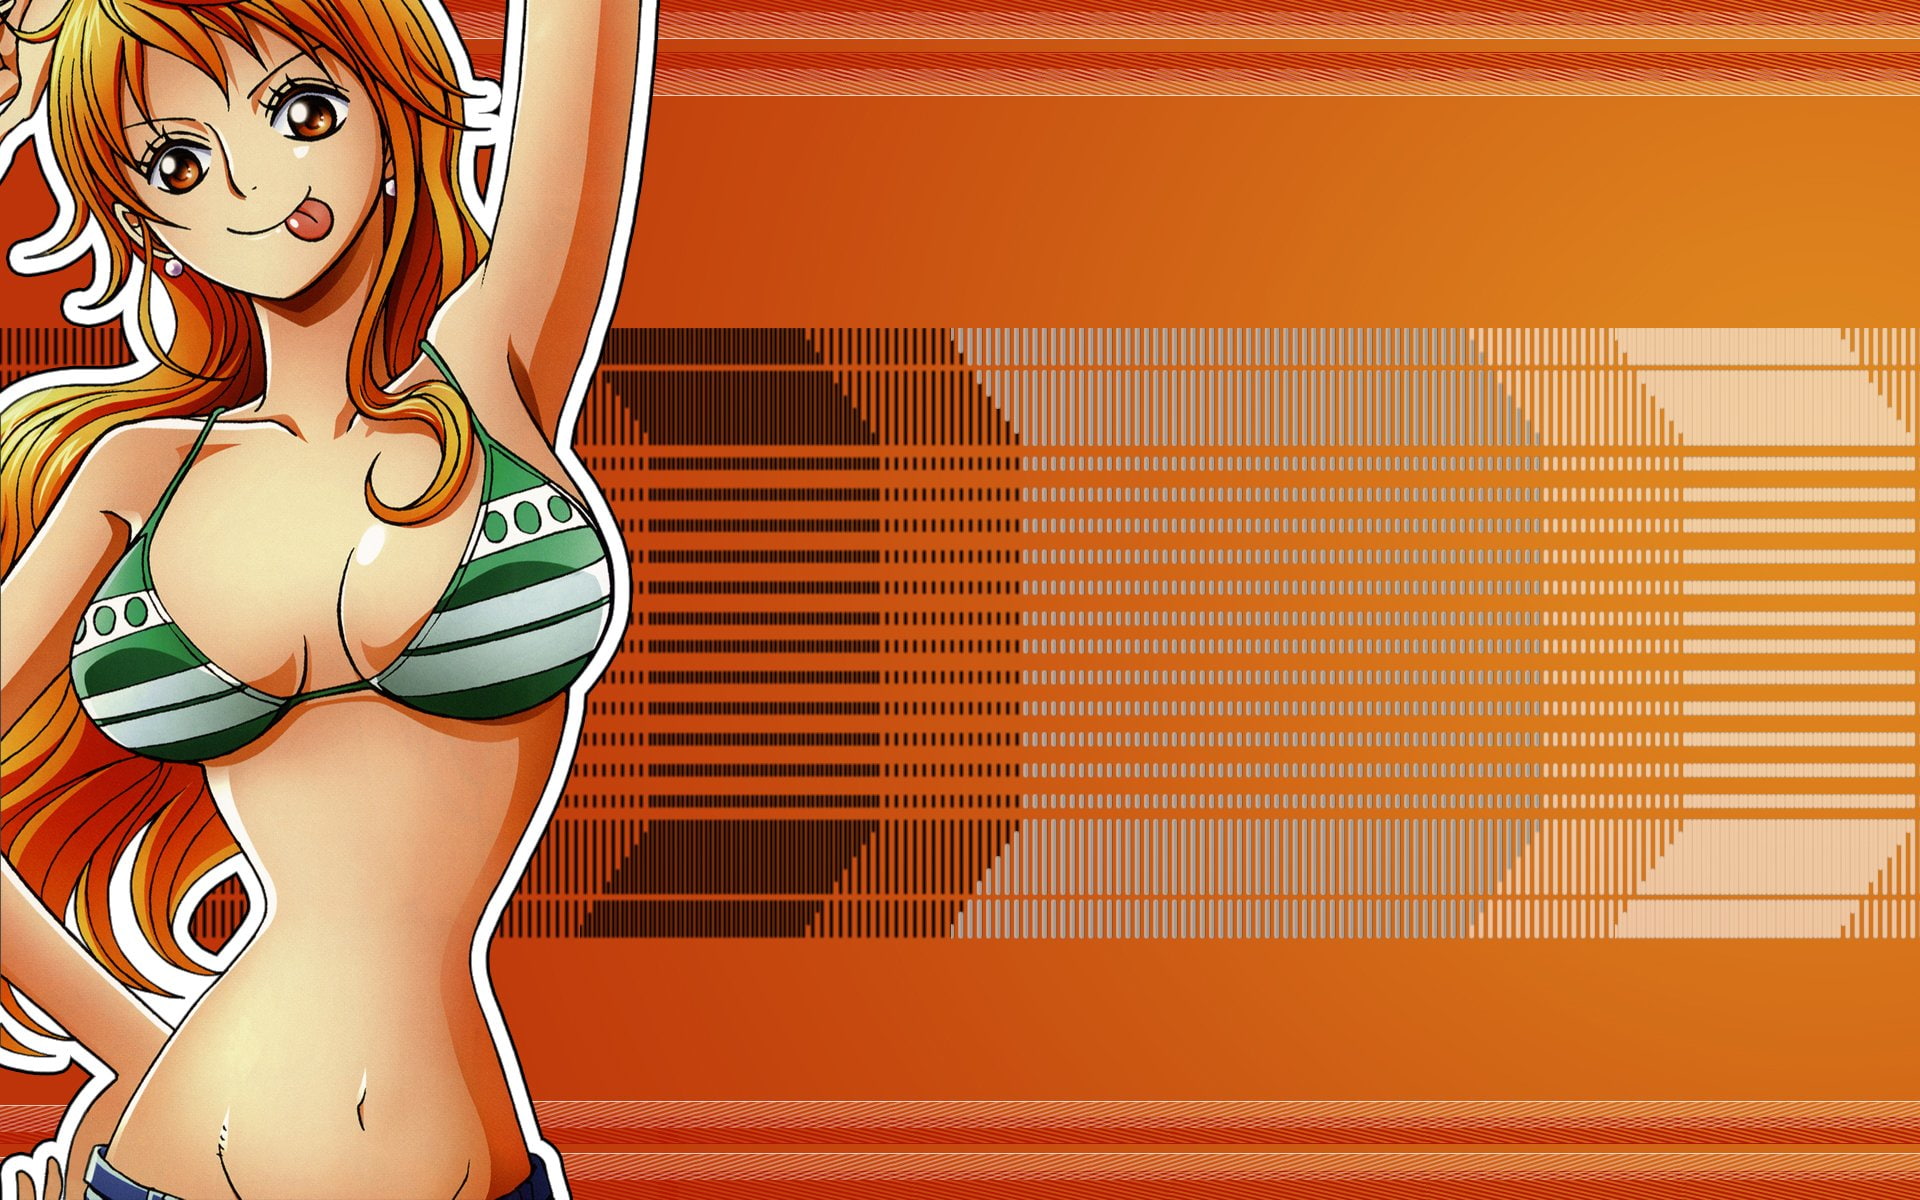 7. Nami from One Piece - wide 8